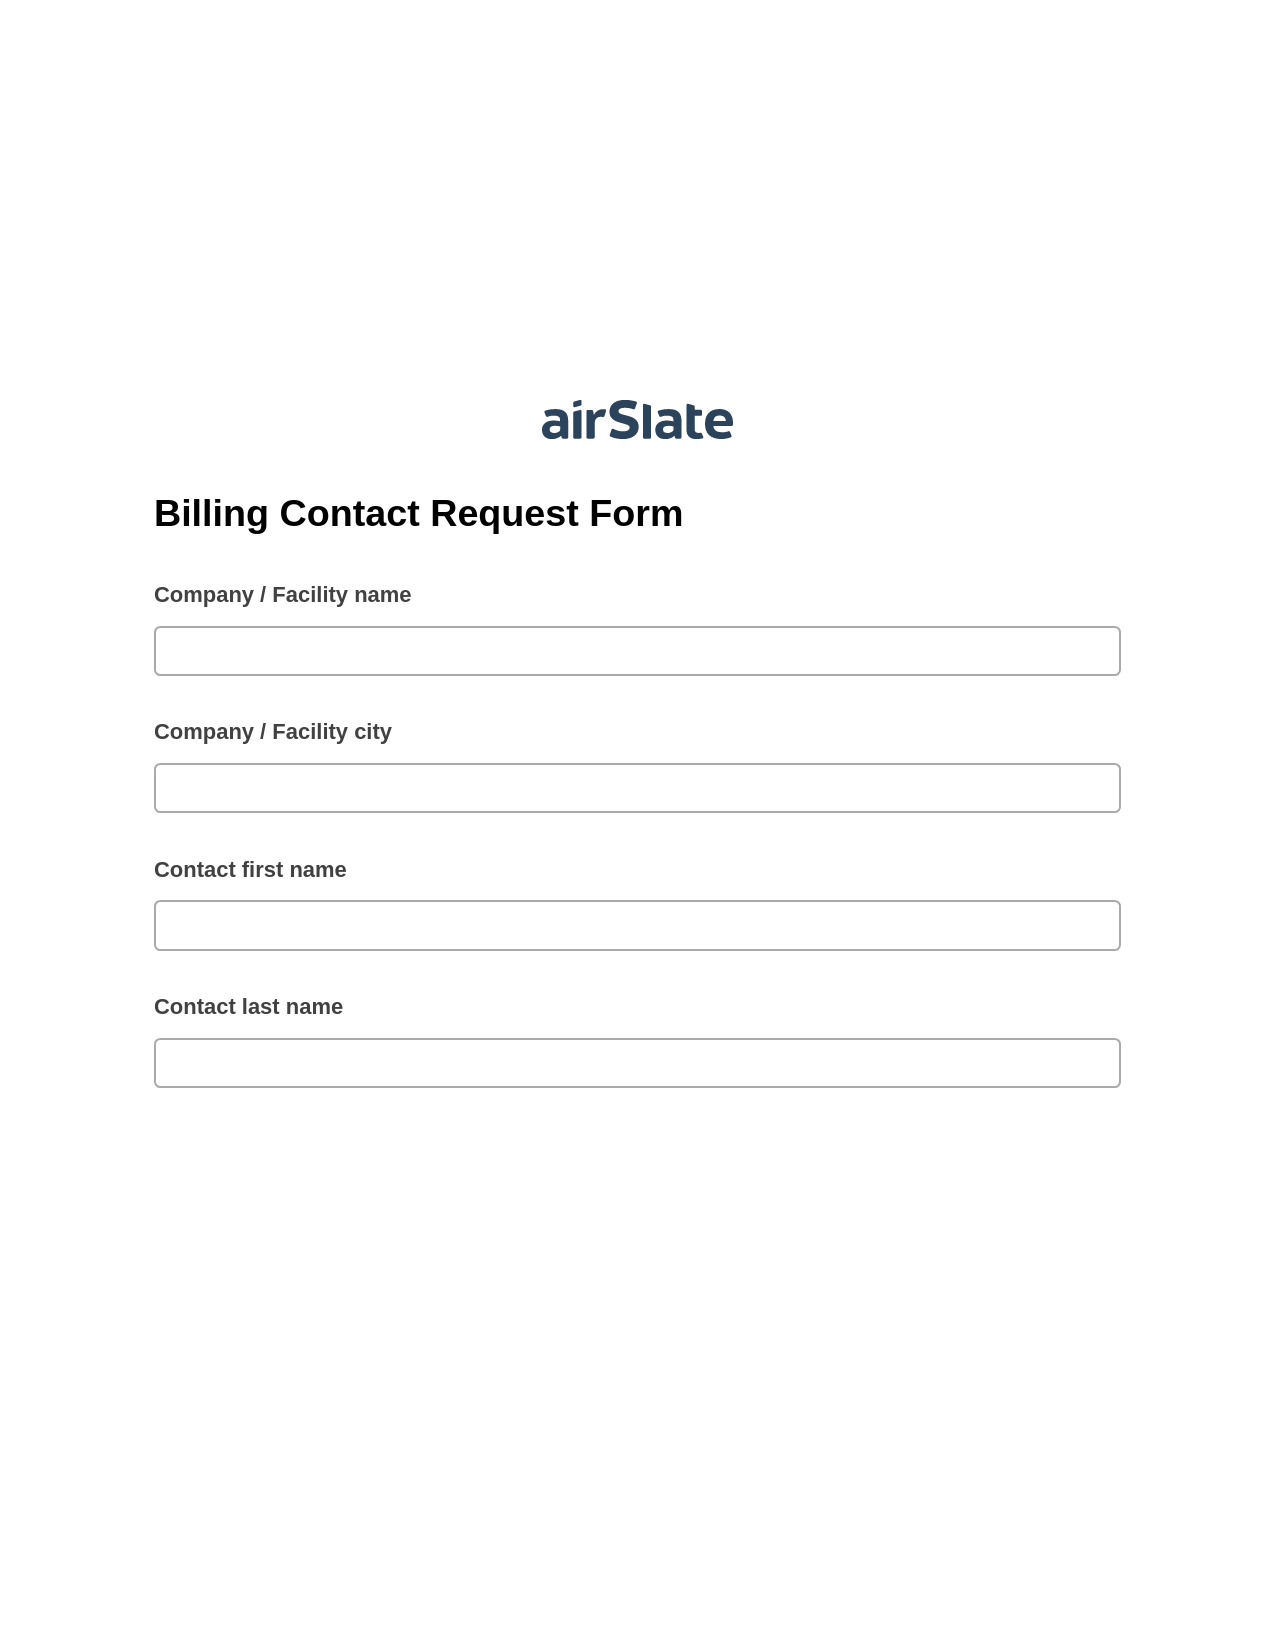 Multirole Billing Contact Request Form Pre-fill from Salesforce Records with SOQL Bot, Google Calendar Bot, Slack Notification Postfinish Bot